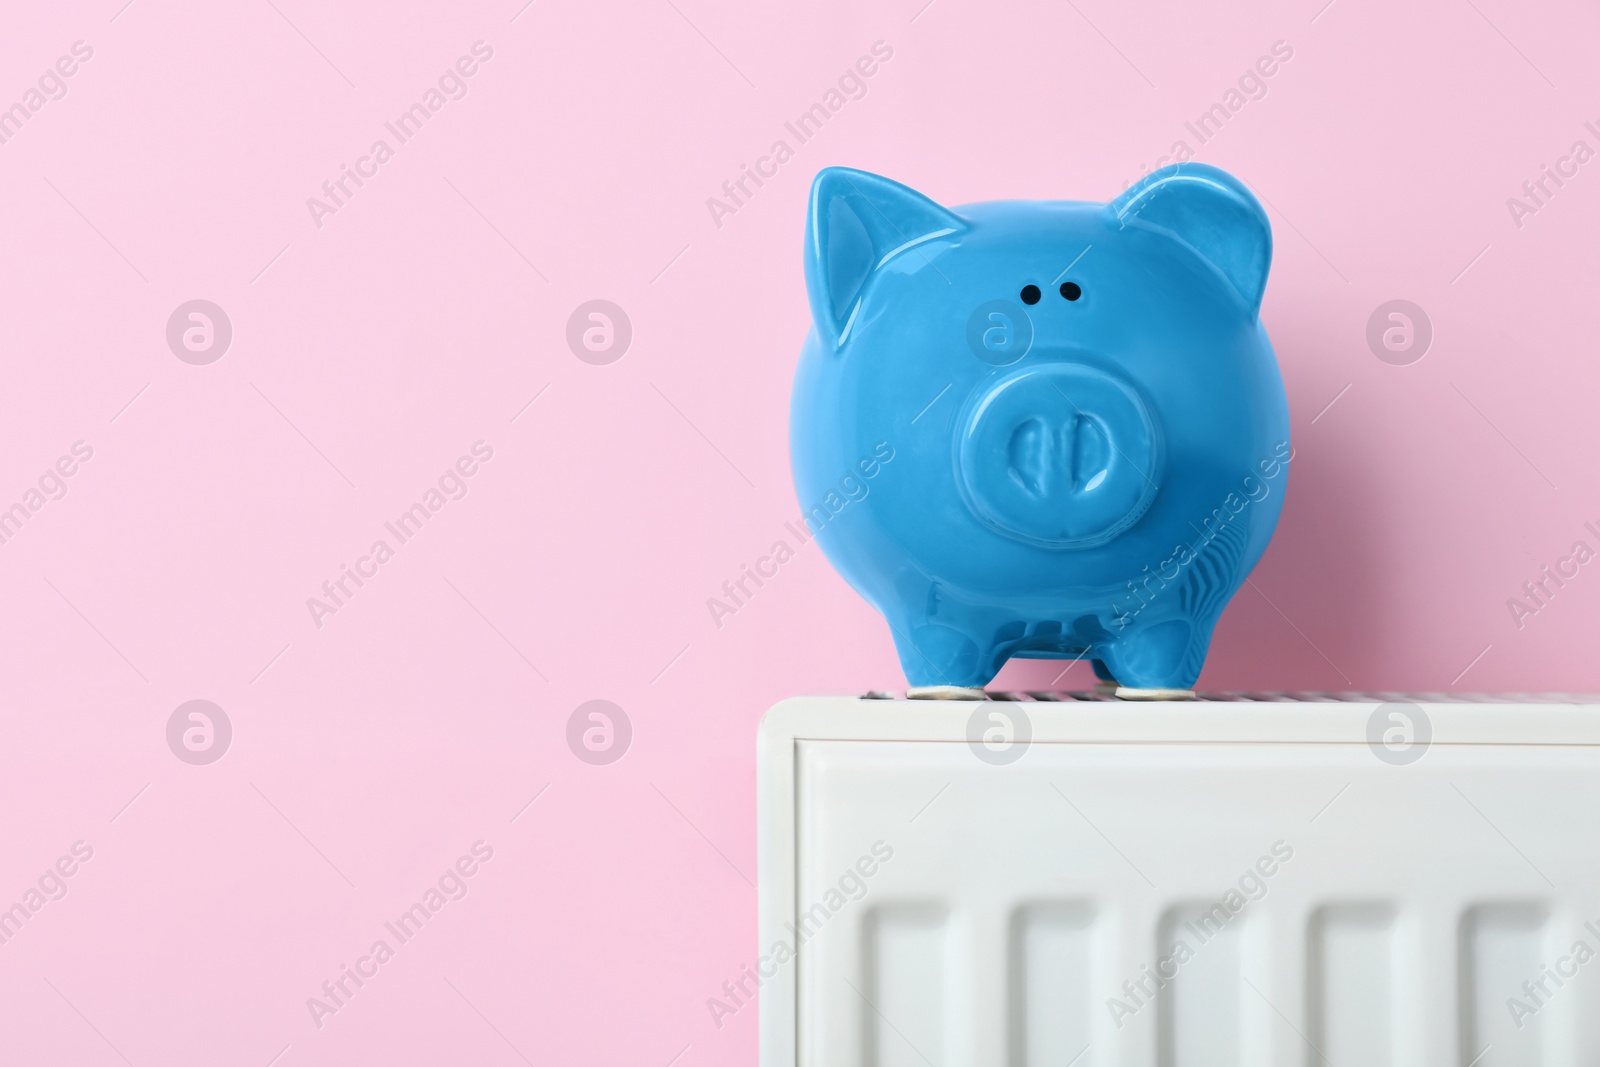 Photo of Piggy bank on heating radiator against pink background, space for text